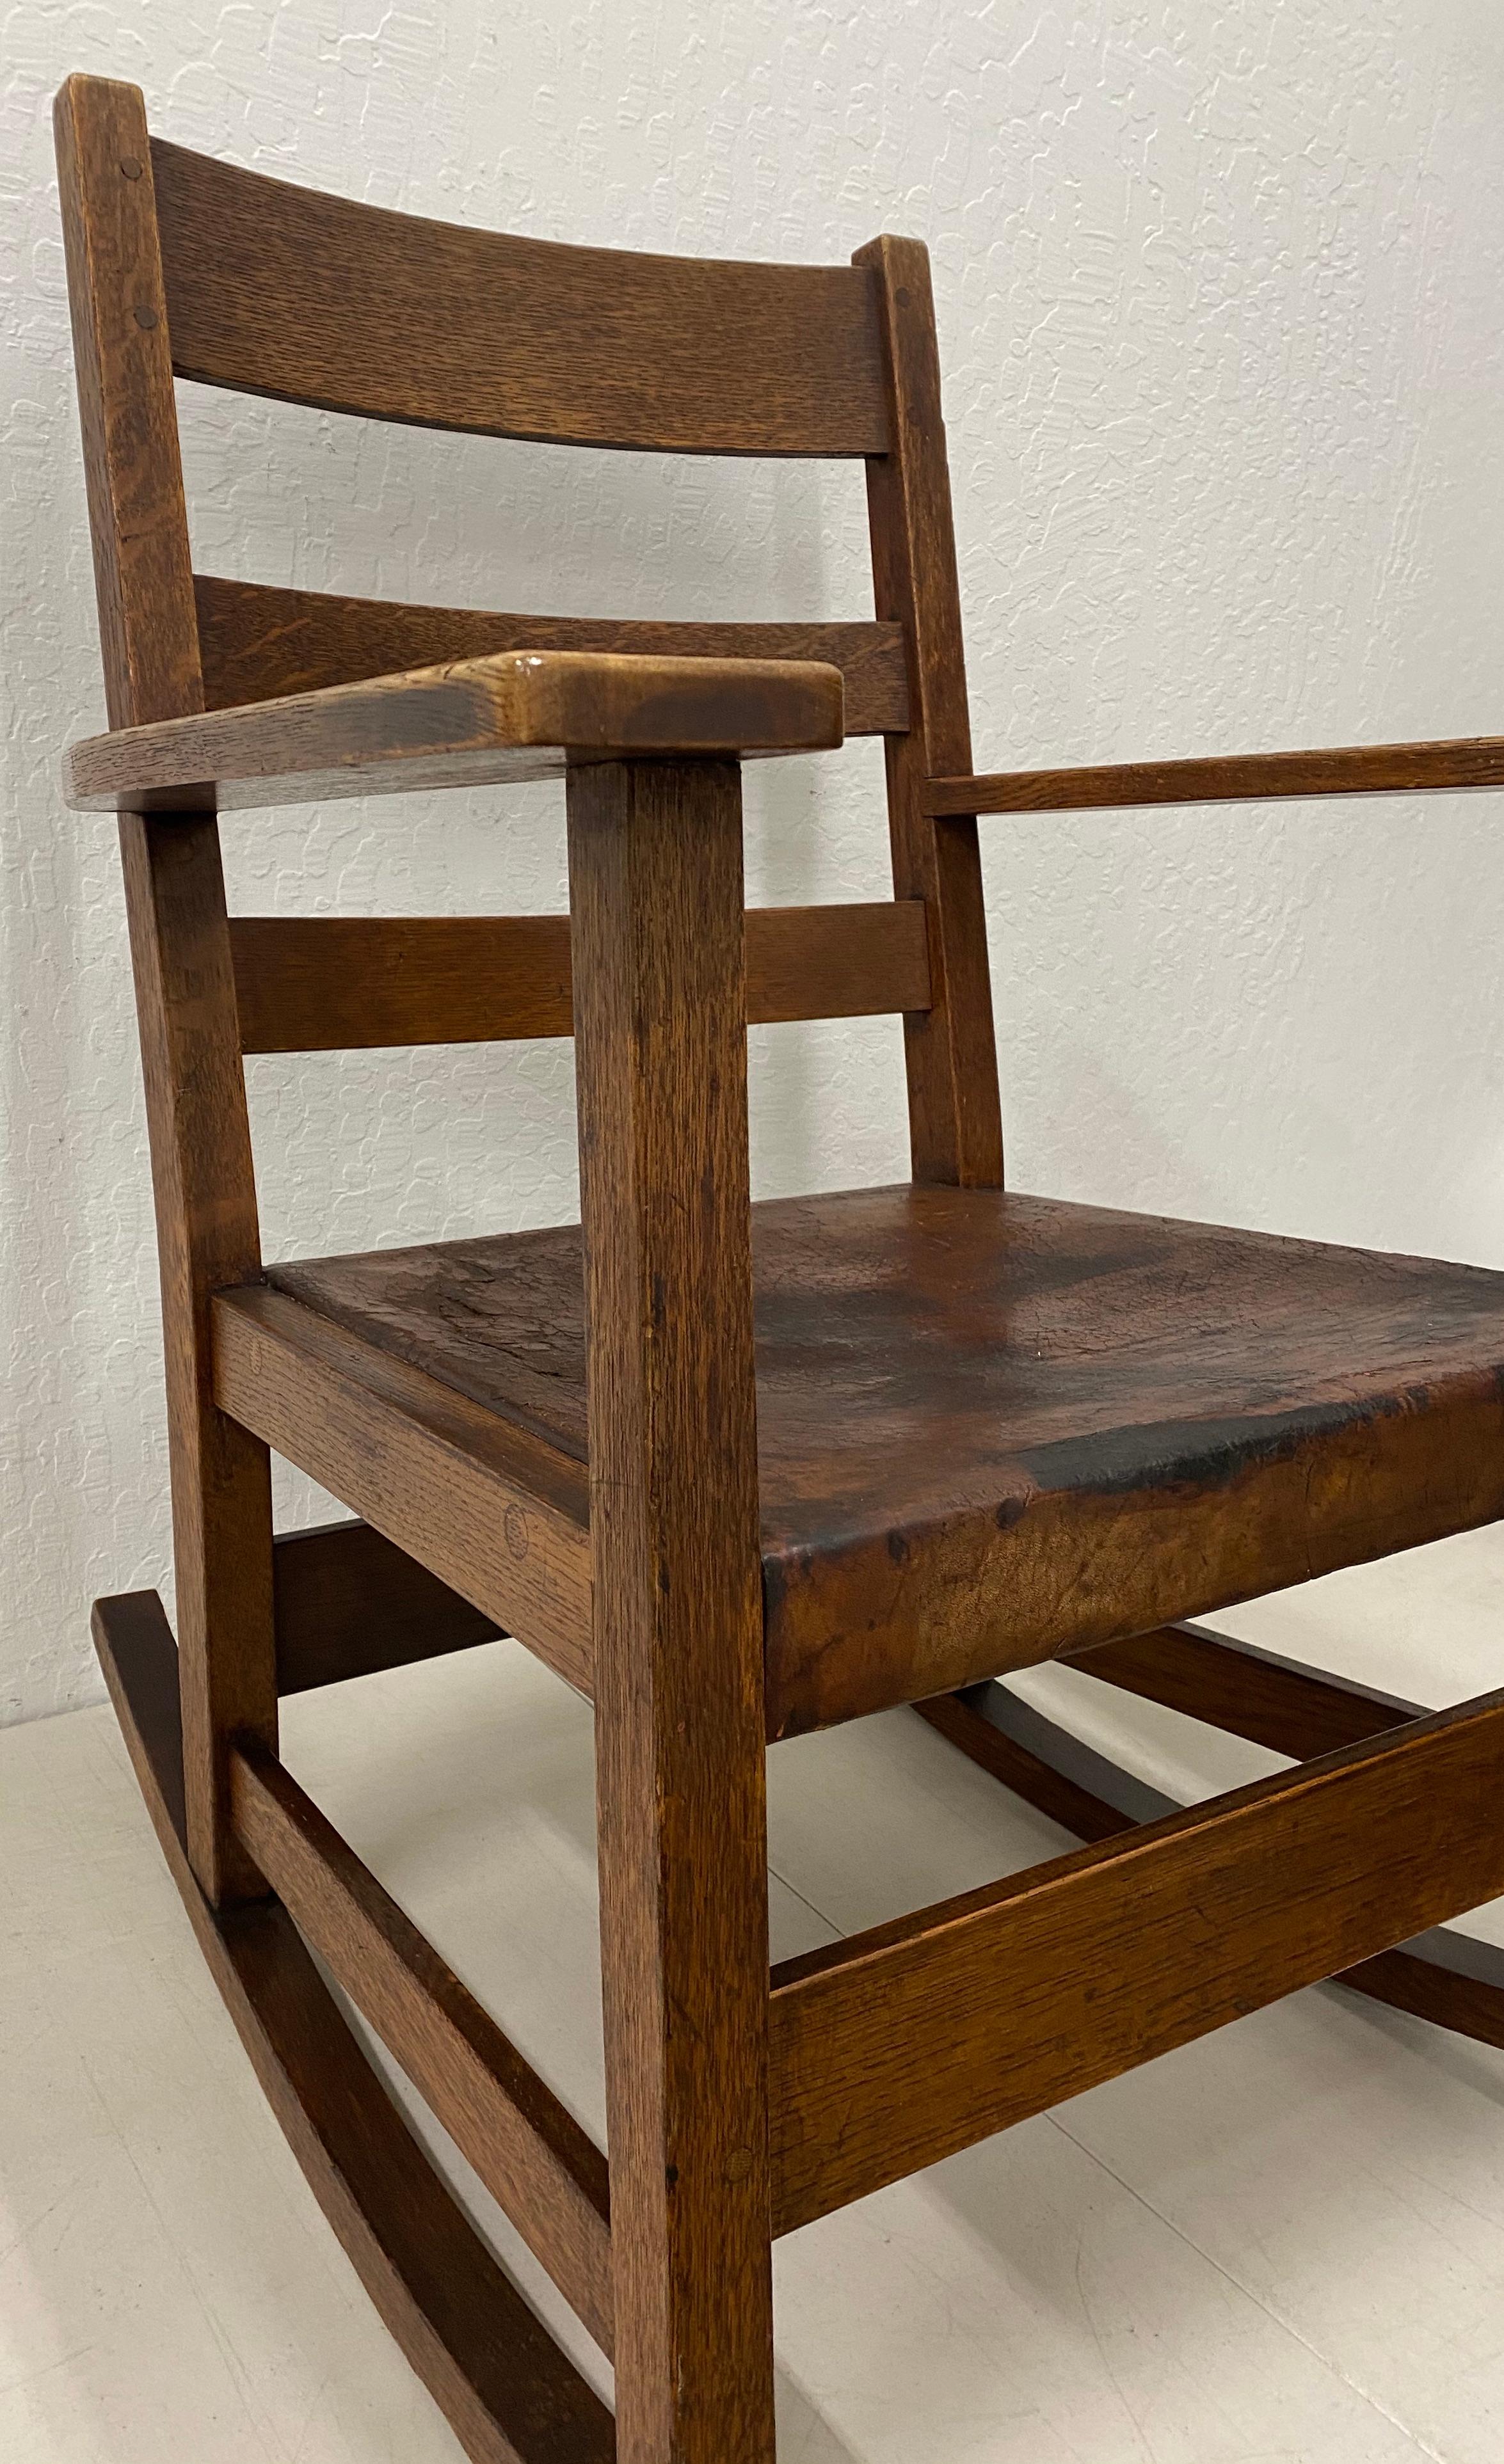 L&J.G. Stickley Arts & Crafts rocking chair with leather seat, circa 1900

Antique quartersawn oak rocker by Stickley.

Measures: 25.75